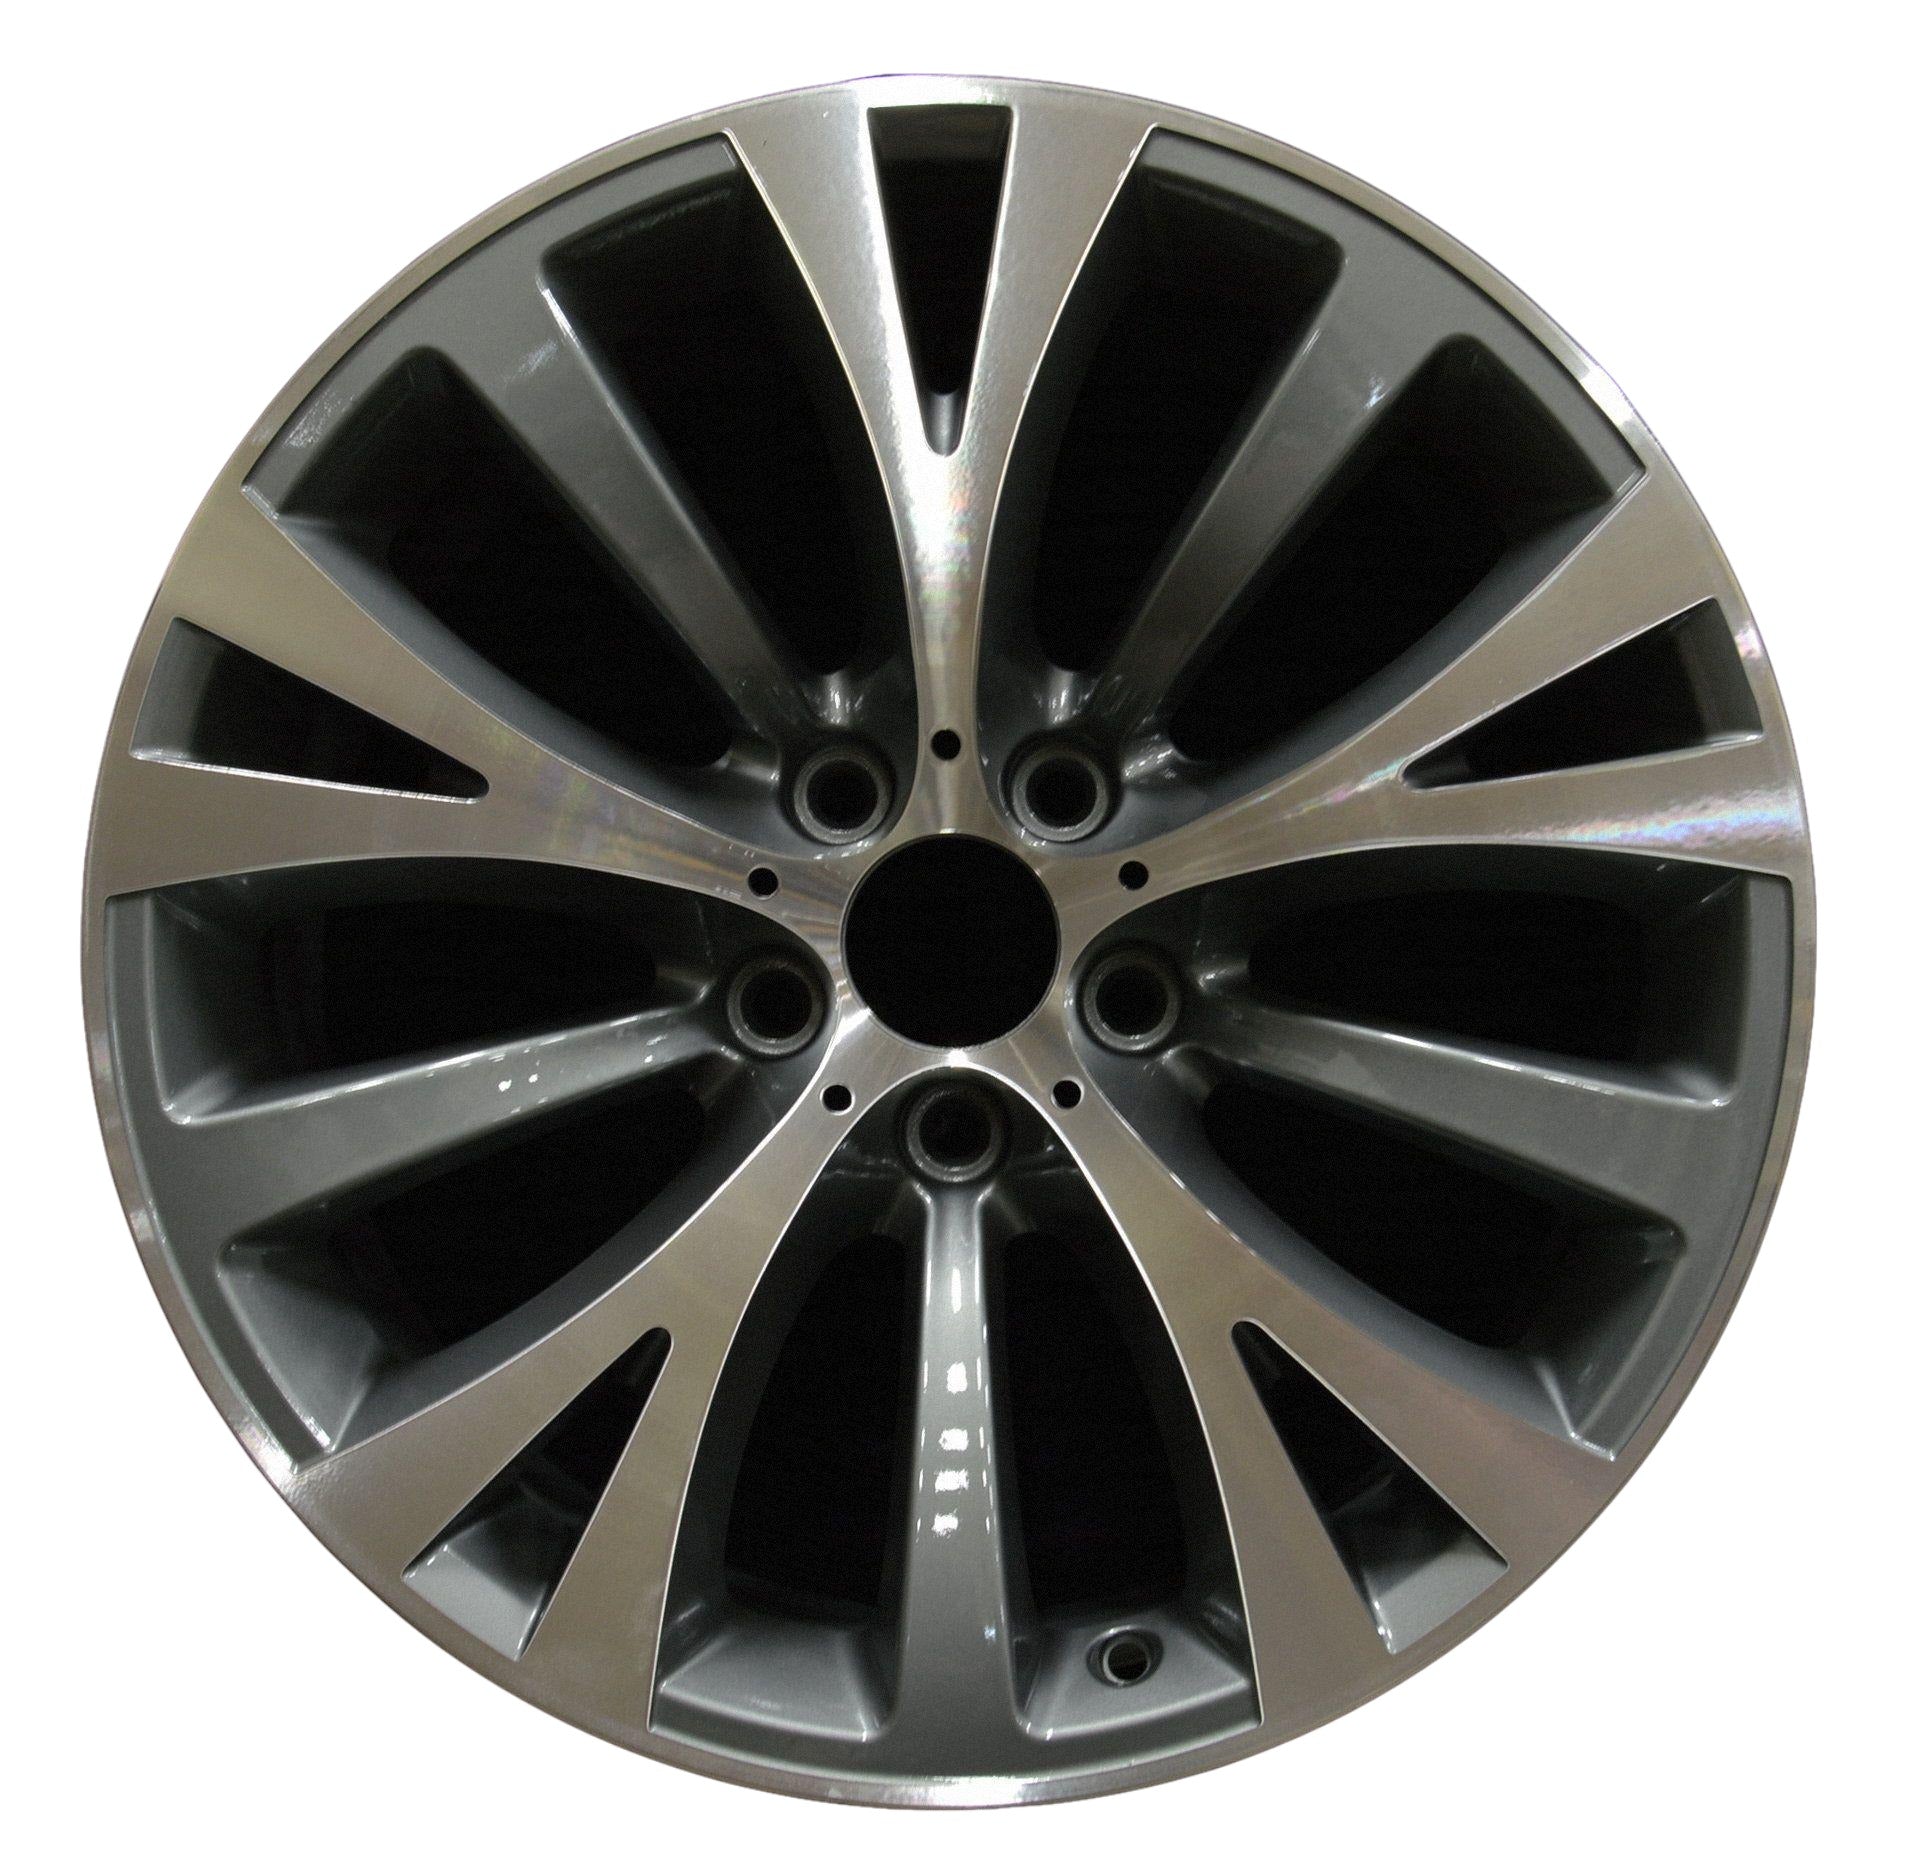 BMW 535i GT  2010, 2011, 2012, 2013, 2014, 2015, 2016, 2017 Factory OEM Car Wheel Size 19x9.5 Alloy WAO.71370RE.LC15.MA